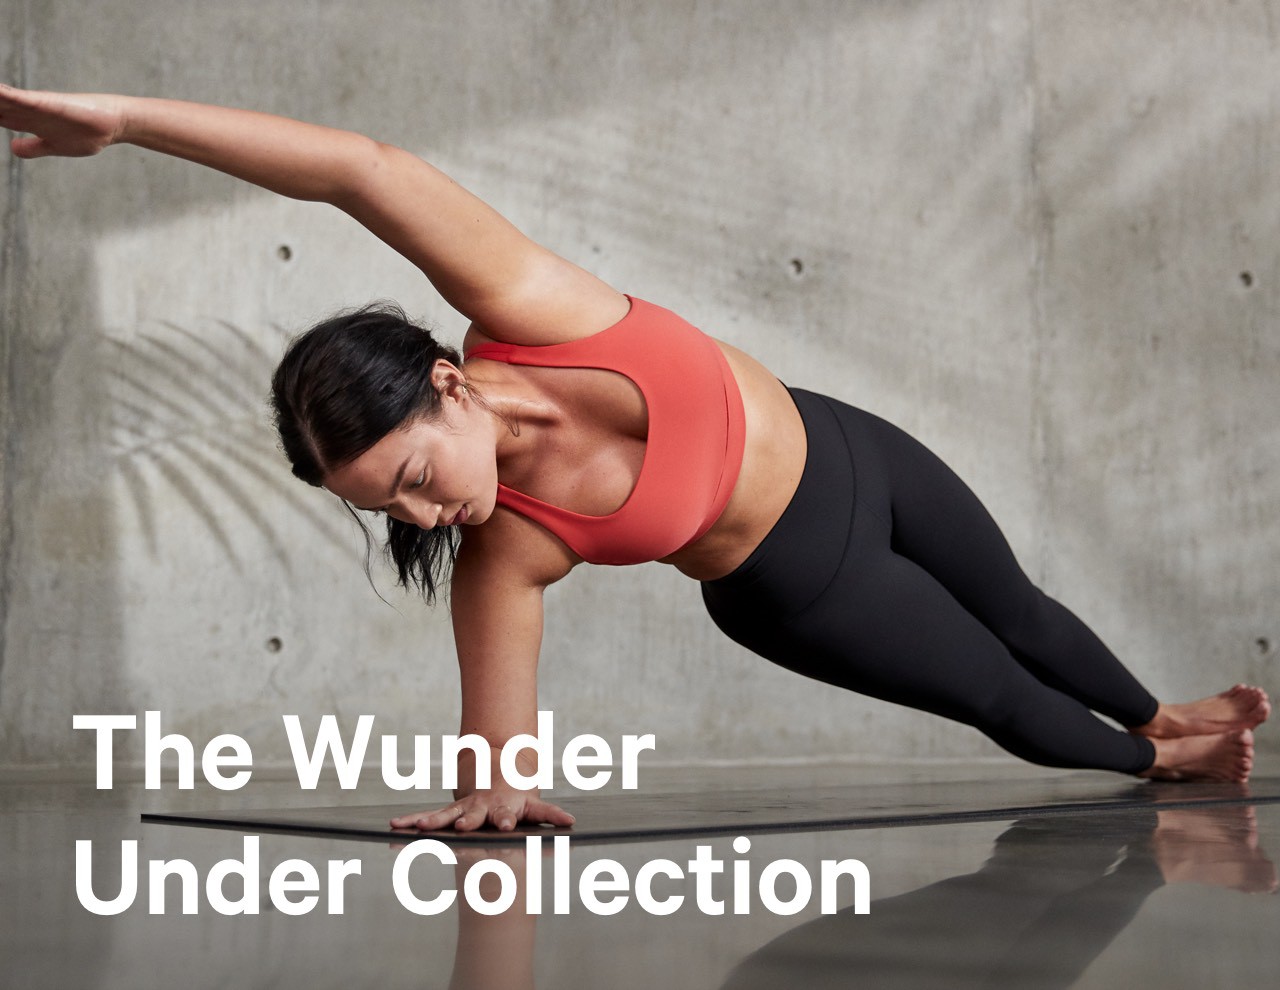 THE WUNDER UNDER COLLECTION